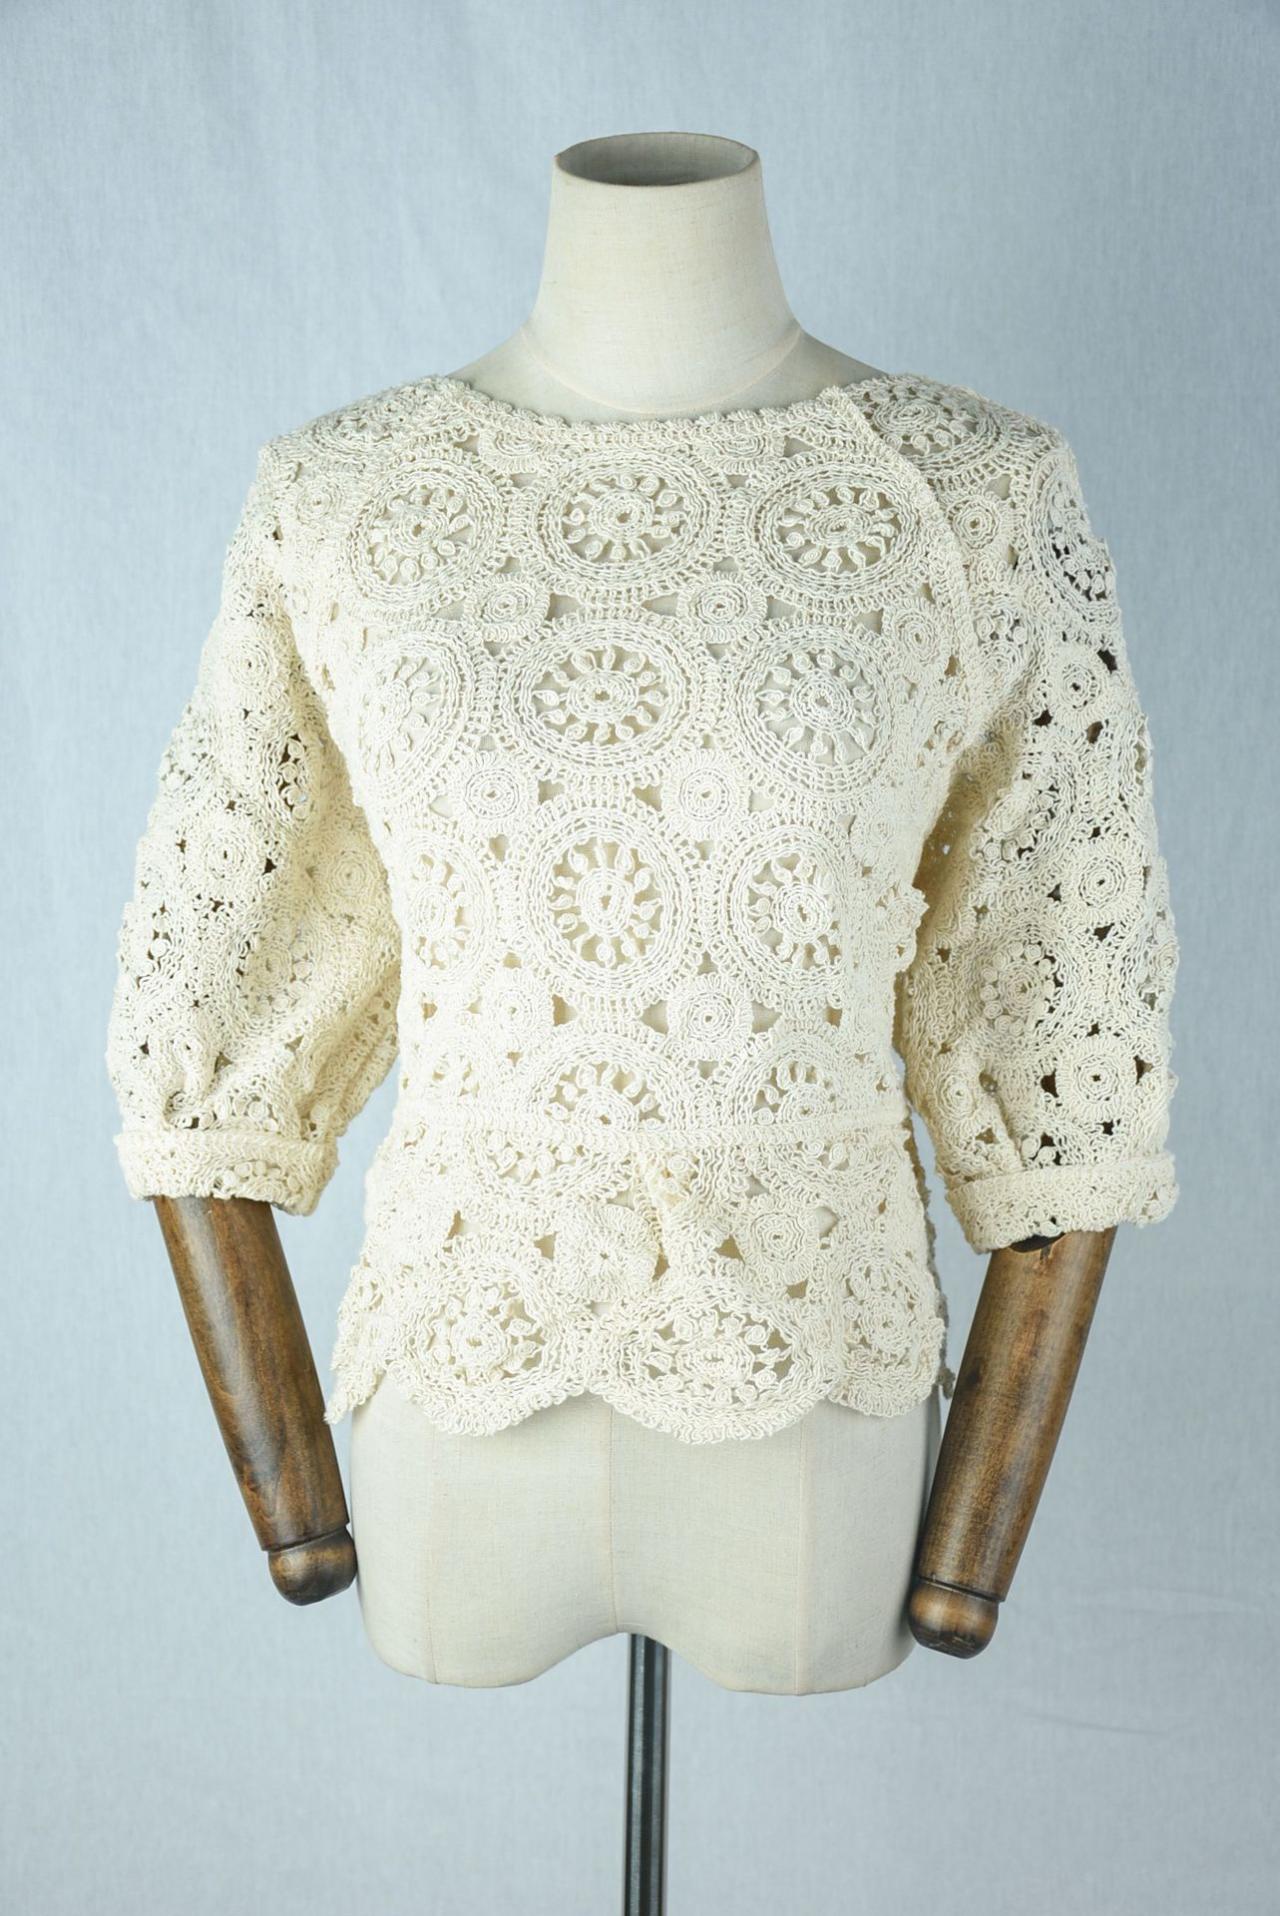 Hollow Knit, Crochet, Knitted Short Sleeves, Loose And Slim Top